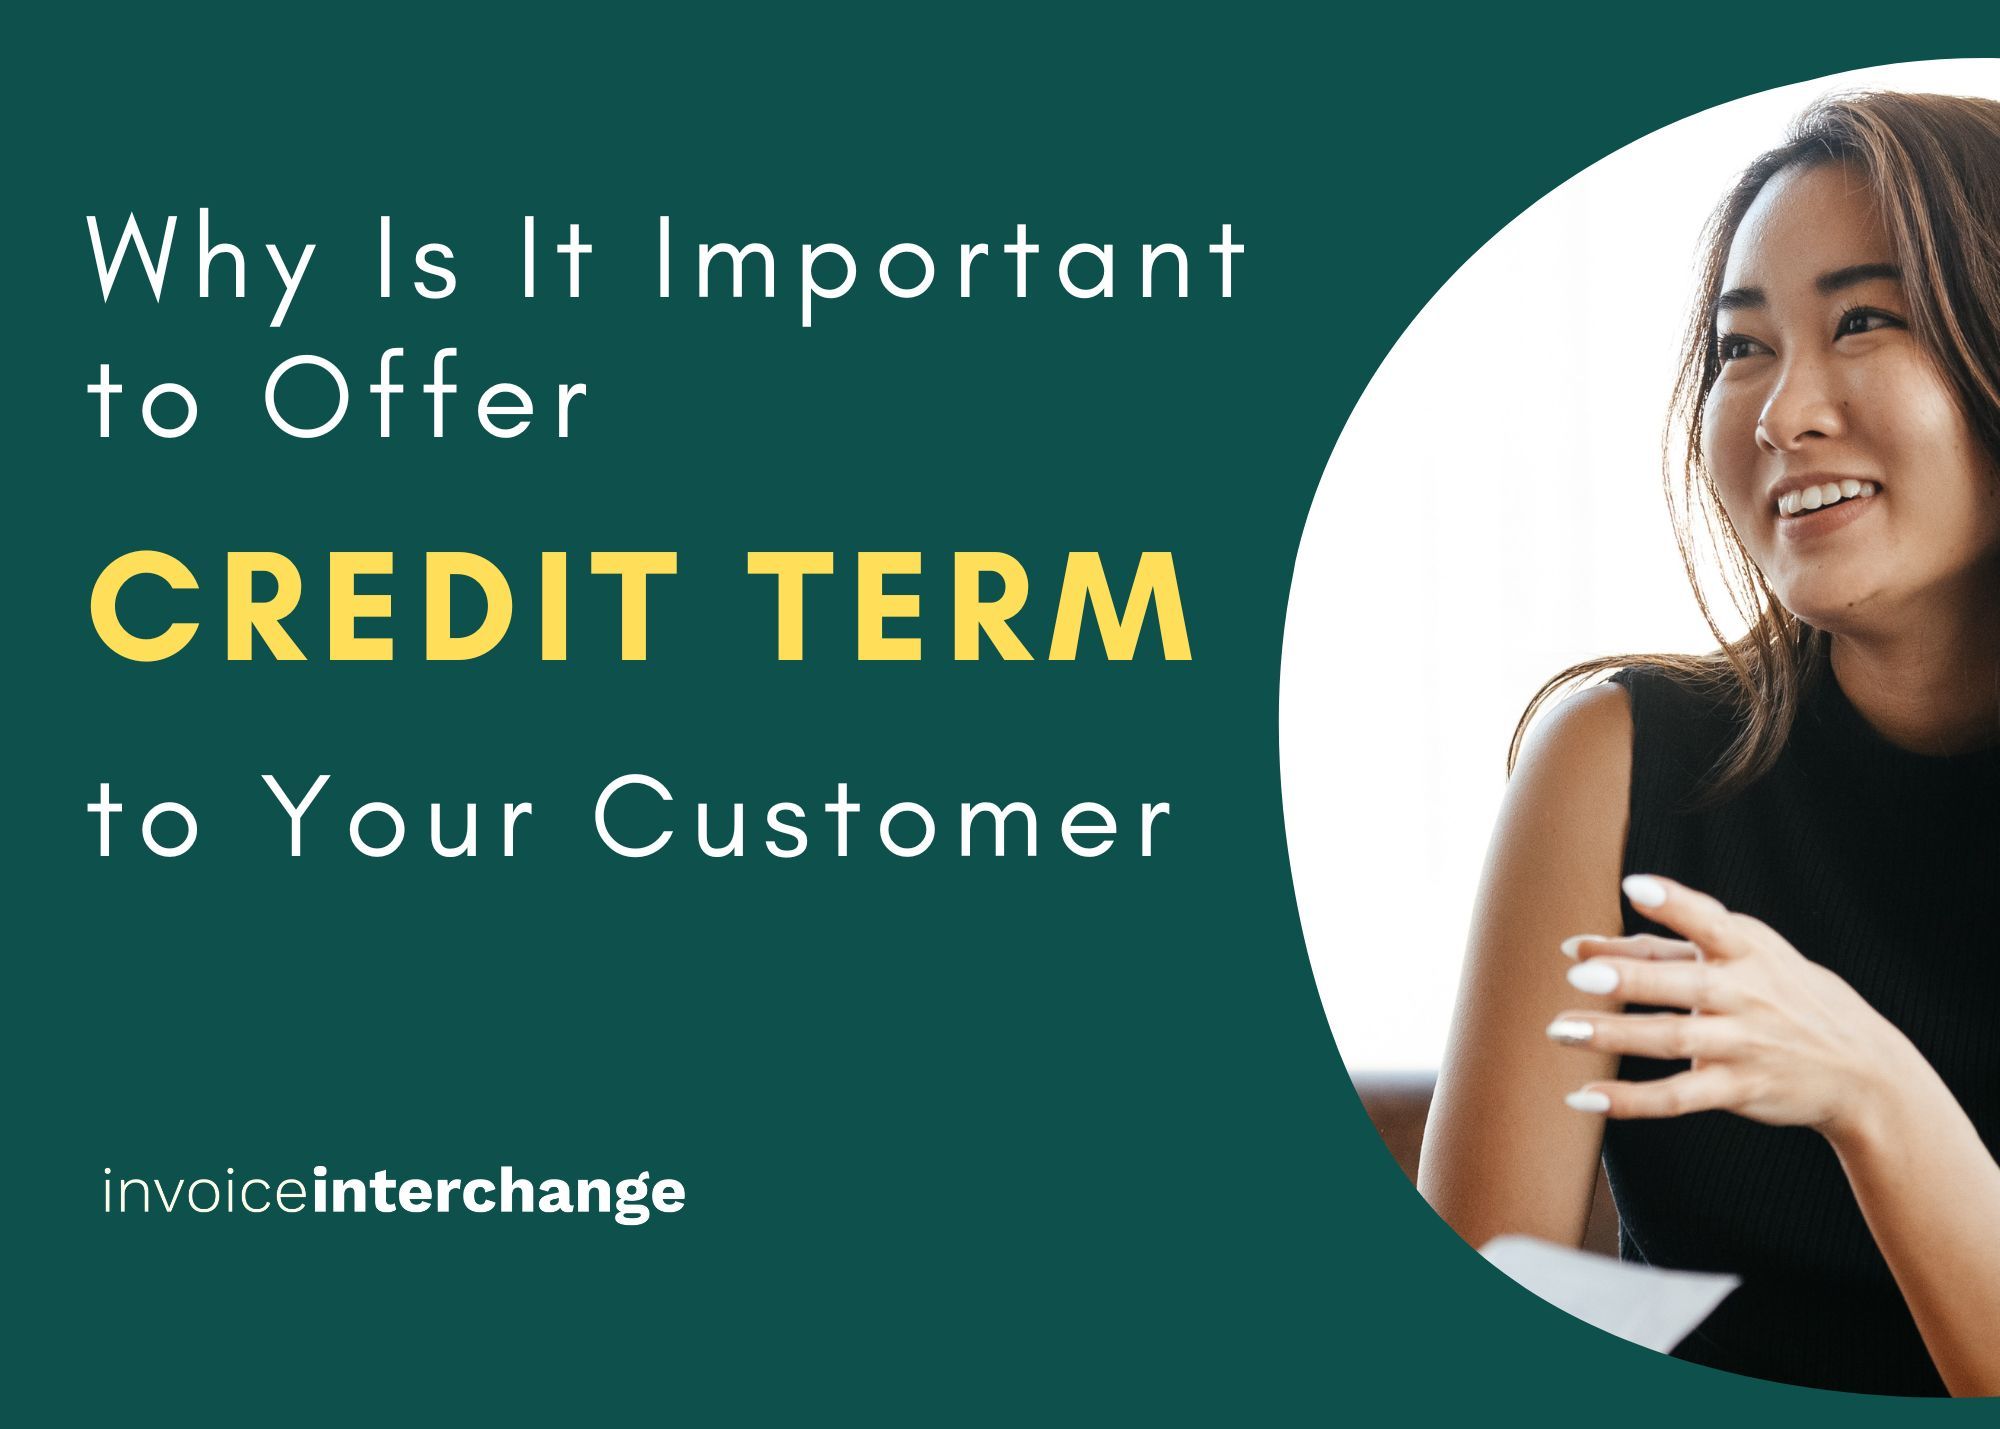 Why Is It Important to Offer Credit Terms to Your Customer as a B2B Business?